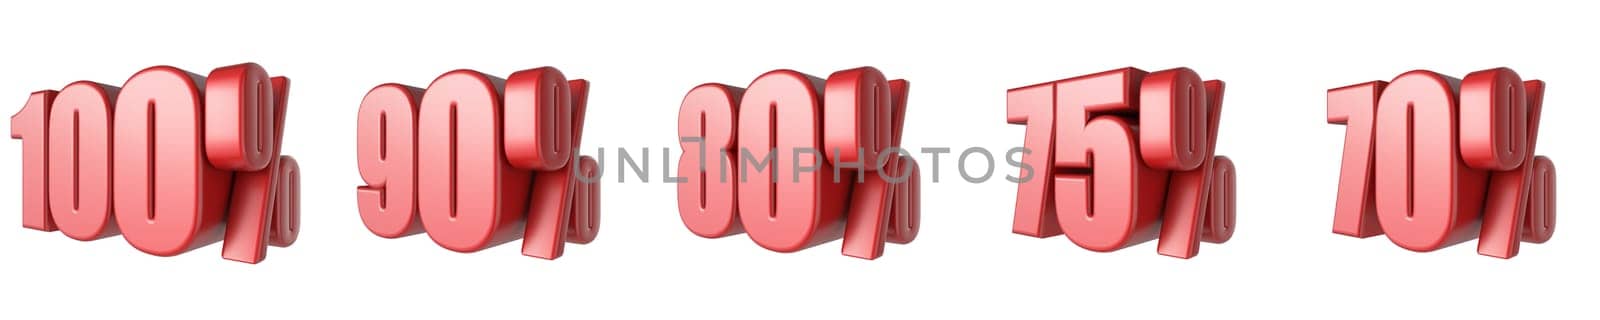 70, 75, 80, 90, 100 Red percent signs 3D by djmilic